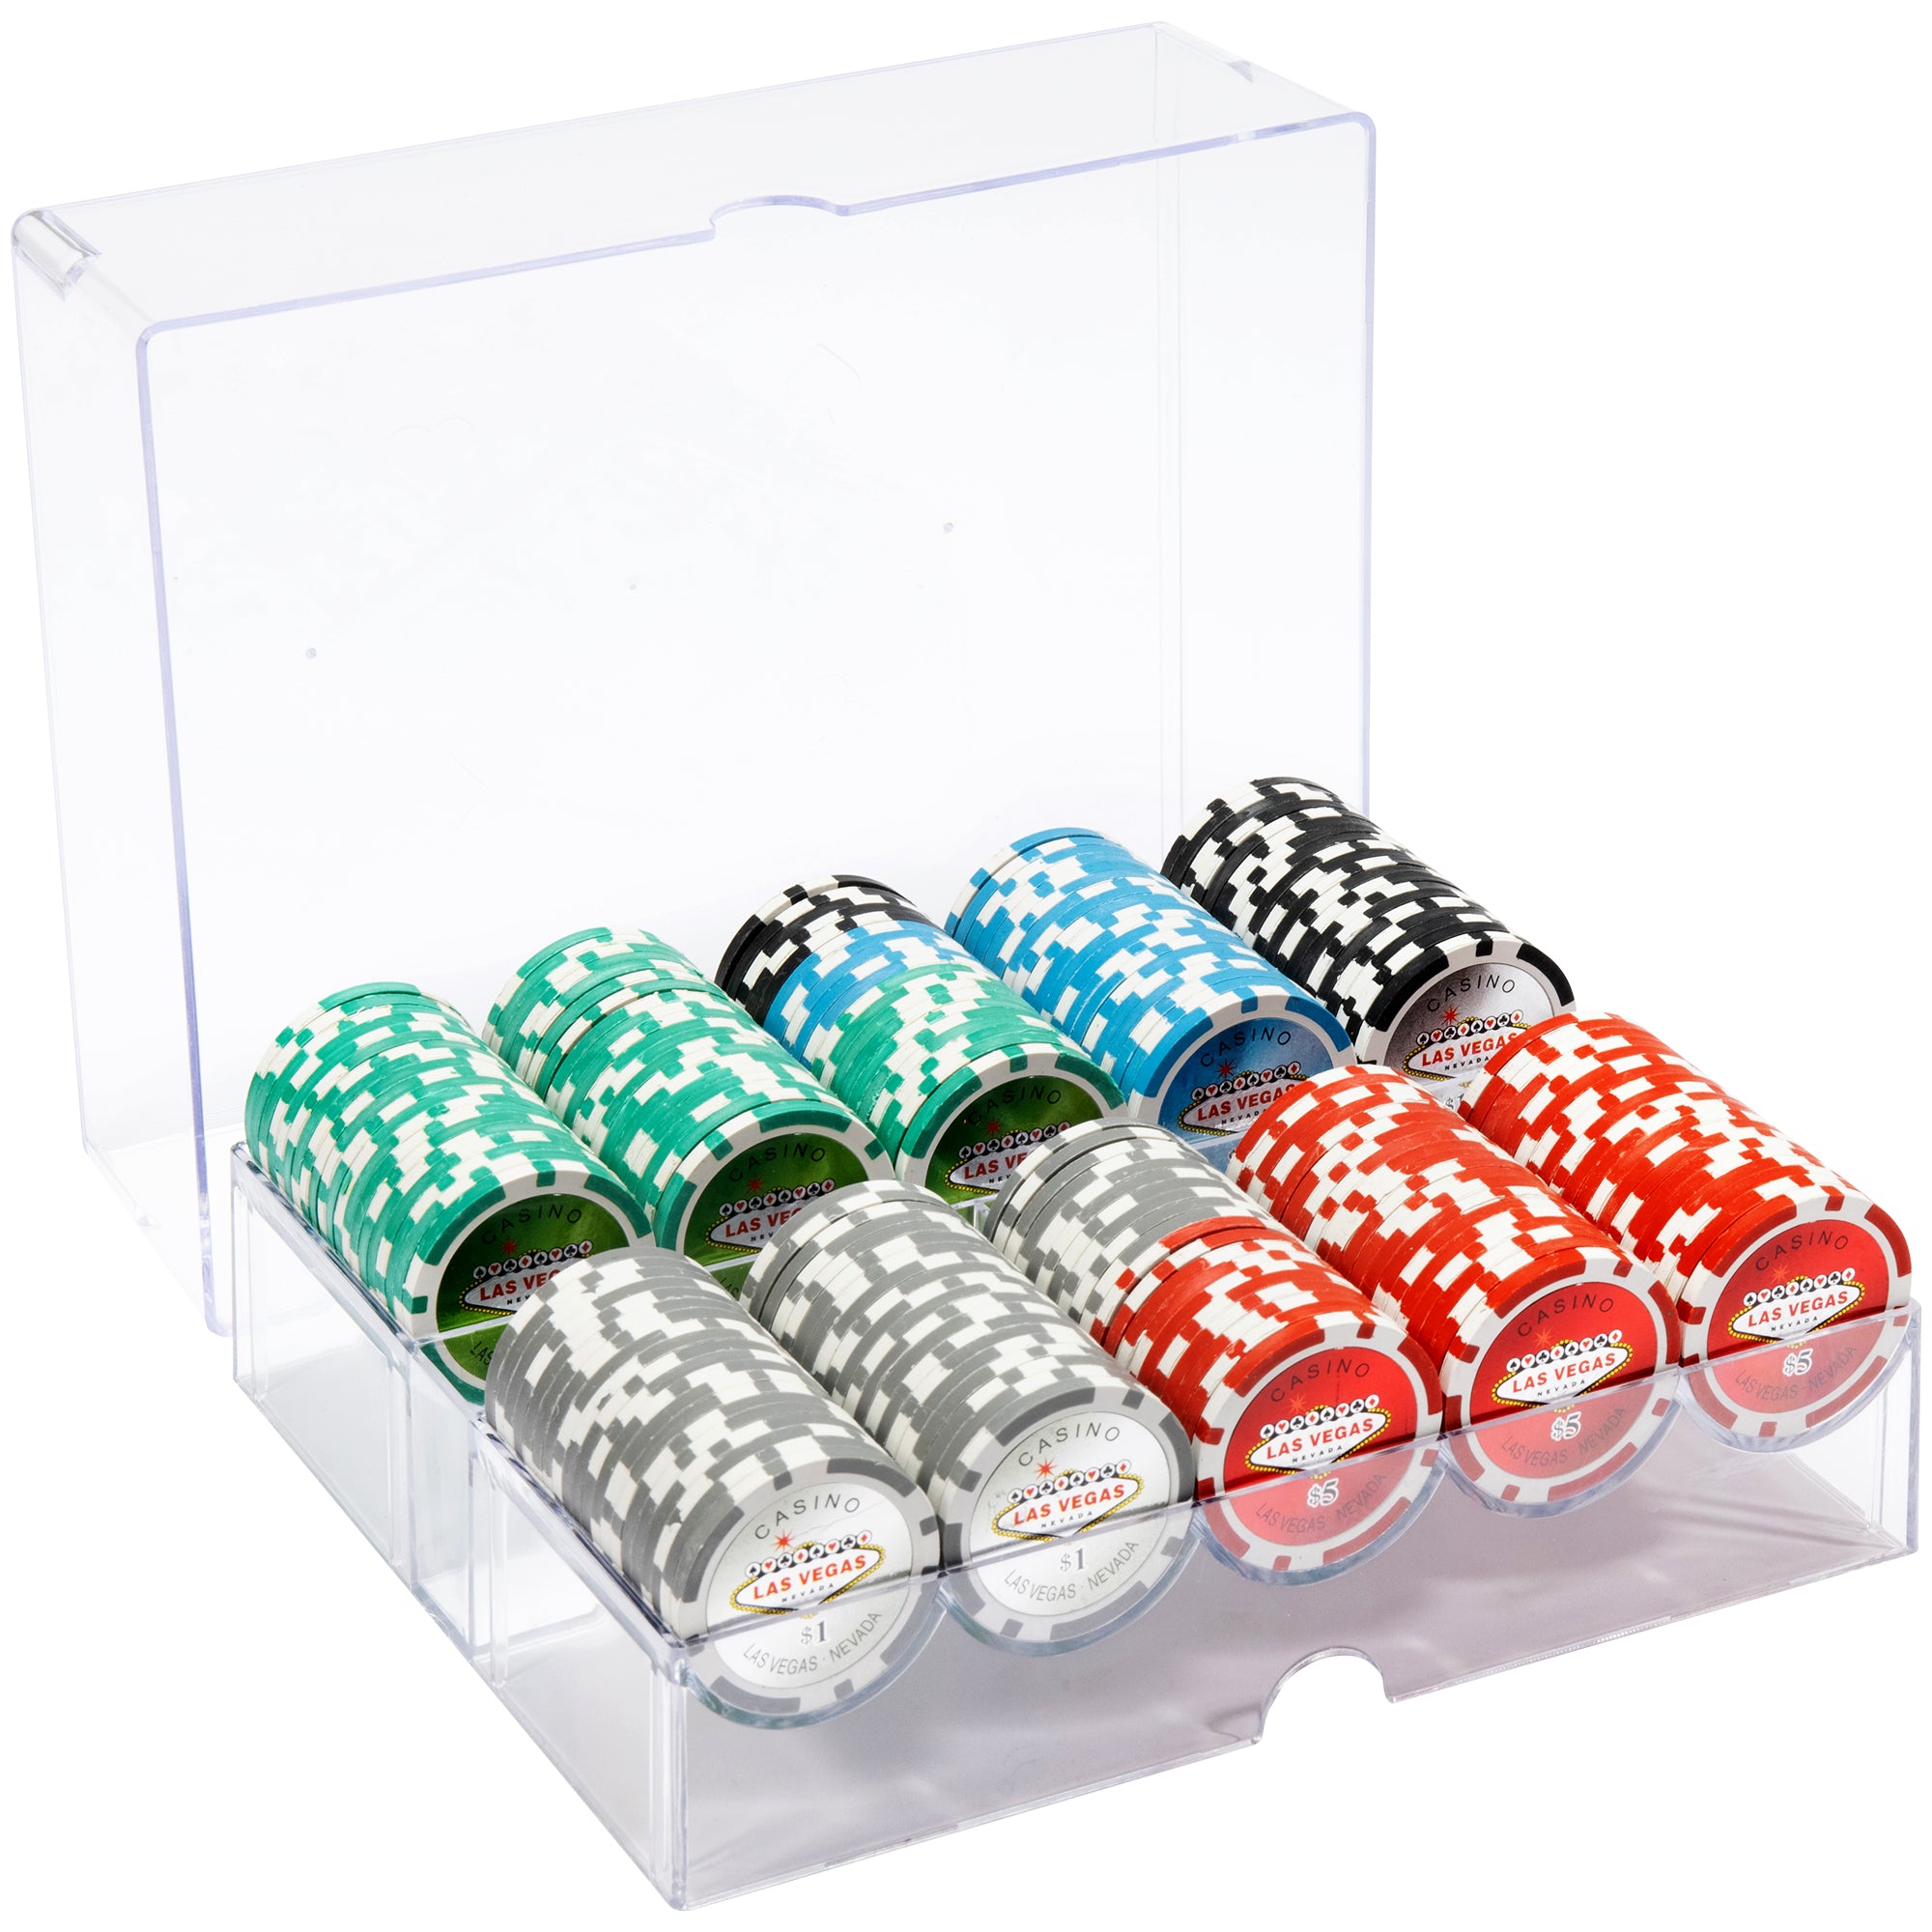 Las Vegas 14-gram Poker Chip Set in Acrylic Tray (200 Count) - Clay Composite